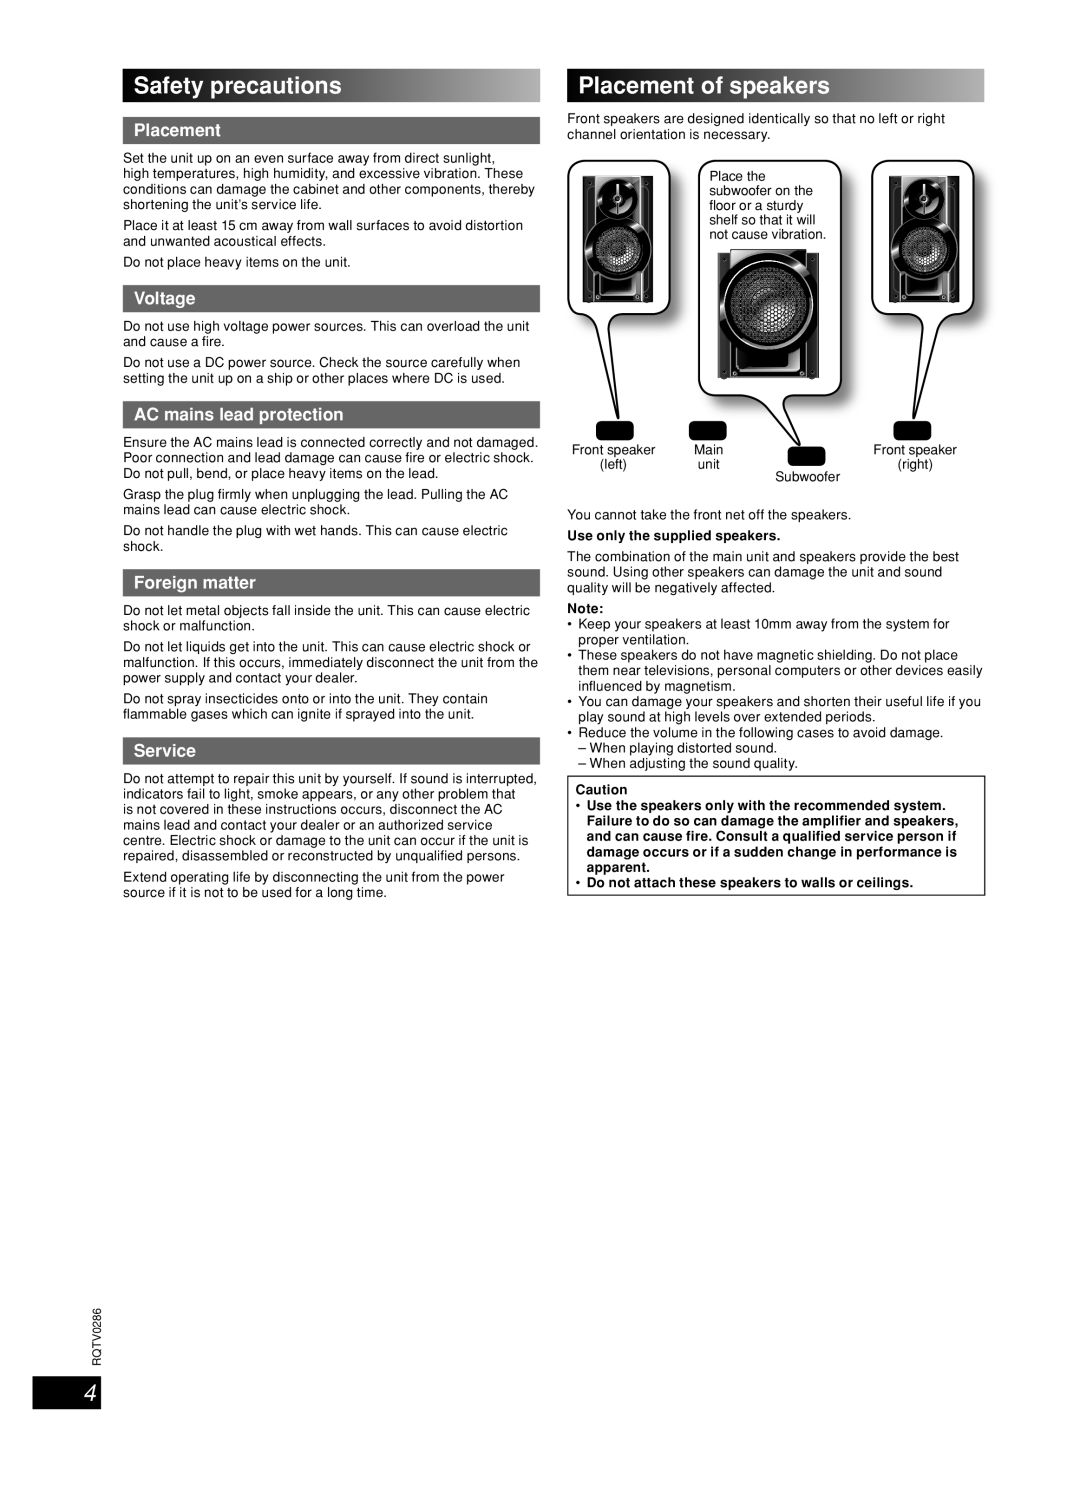 Panasonic SB-WAK770 Safety precautions, Placement of speakers, Voltage, AC mains lead protection, Foreign matter, Service 